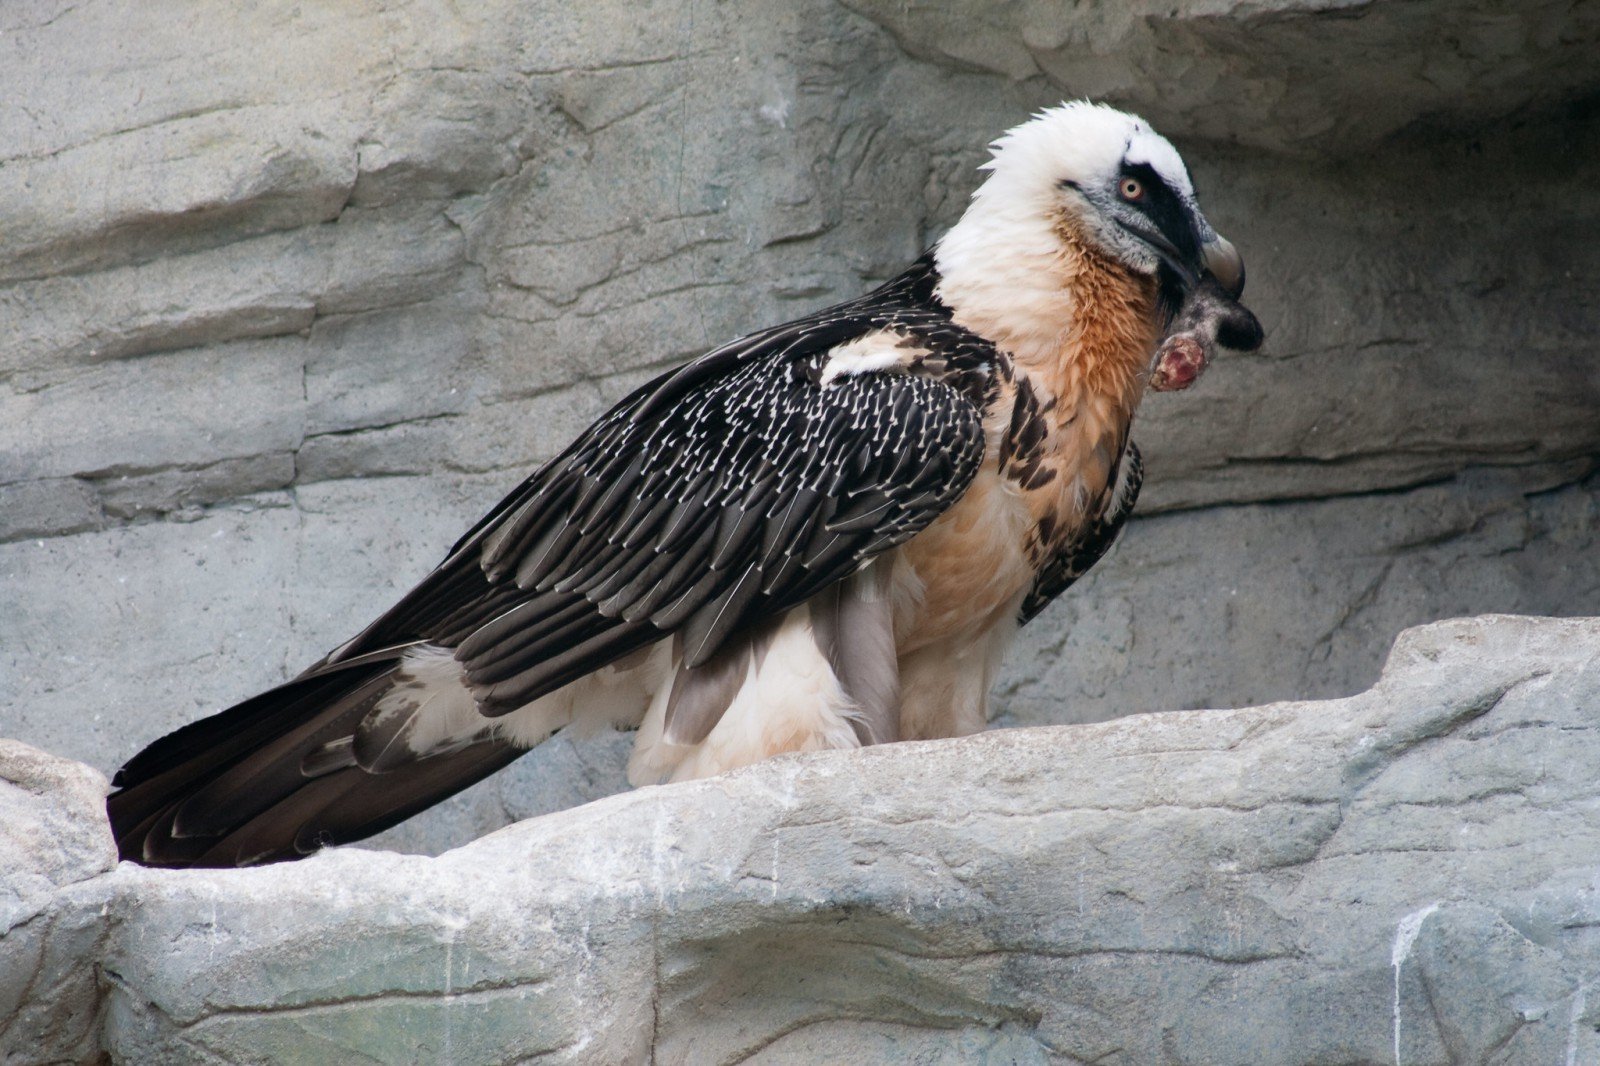 Bearded Vultures do not have the bald heads of most other vultures.